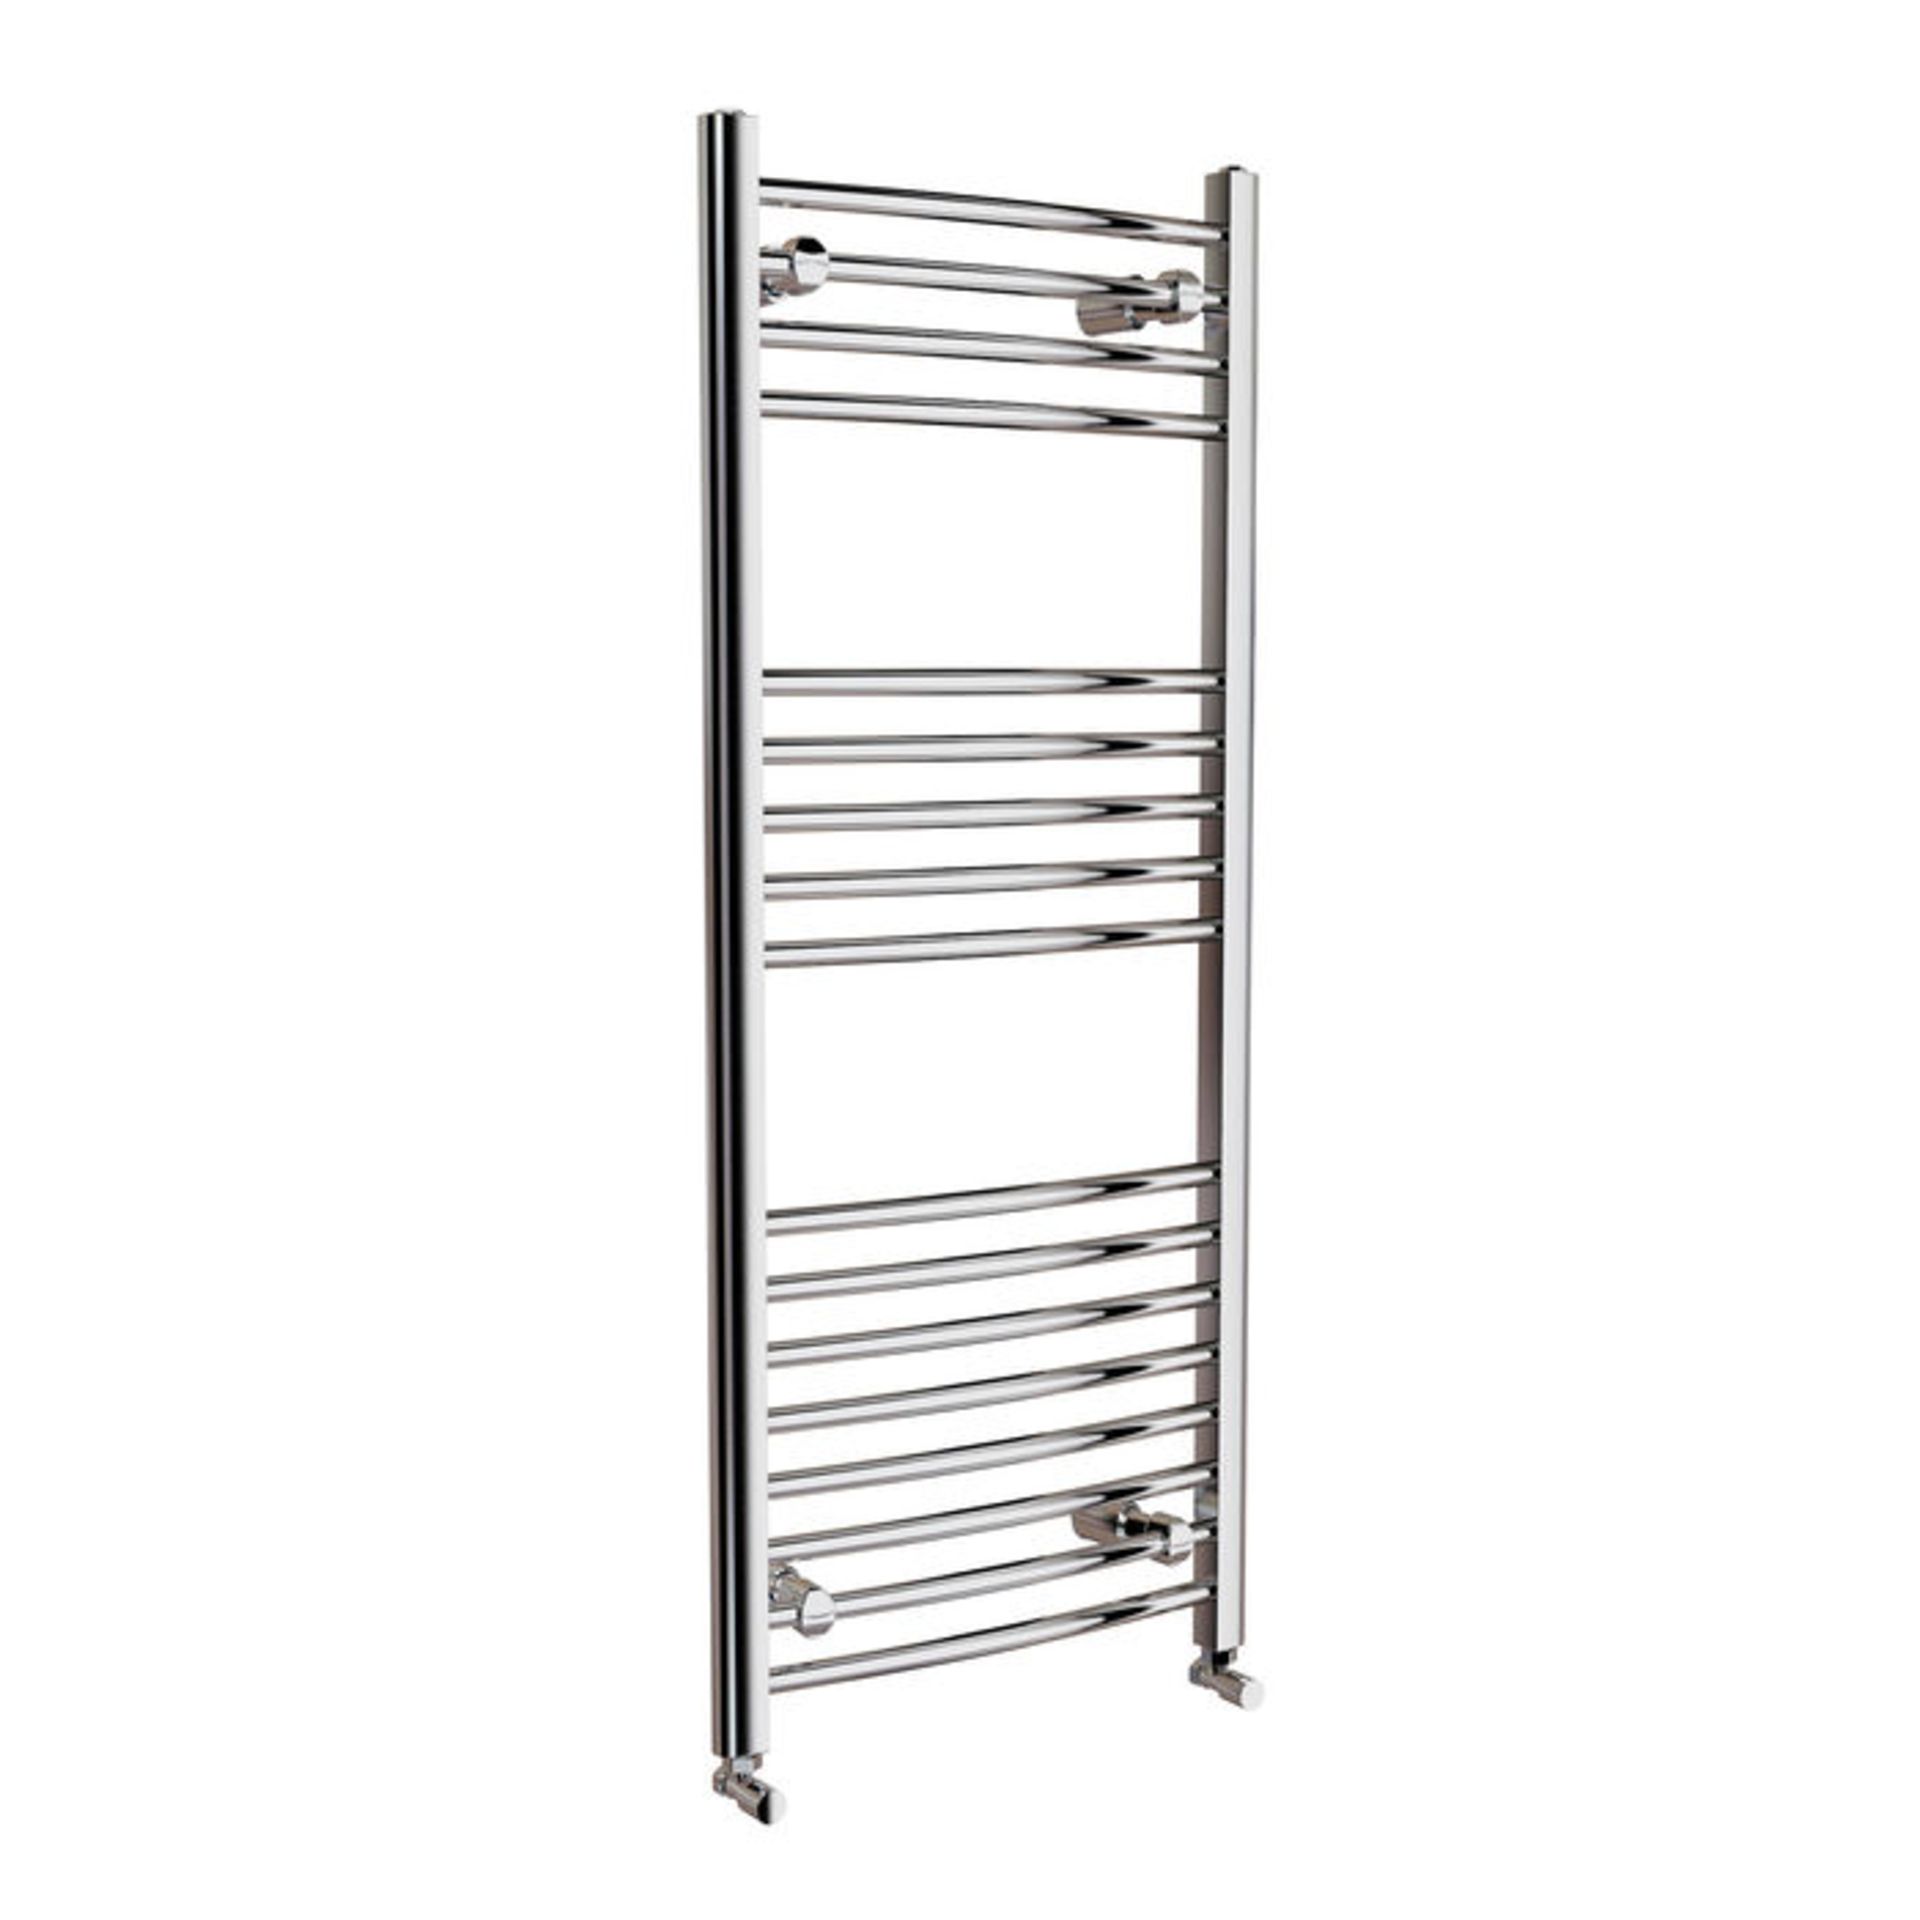 (TA266) 1200x500mm - 20mm Tubes - Chrome Curved Rail Ladder Towel Radiator. Made from chrome - Image 3 of 3